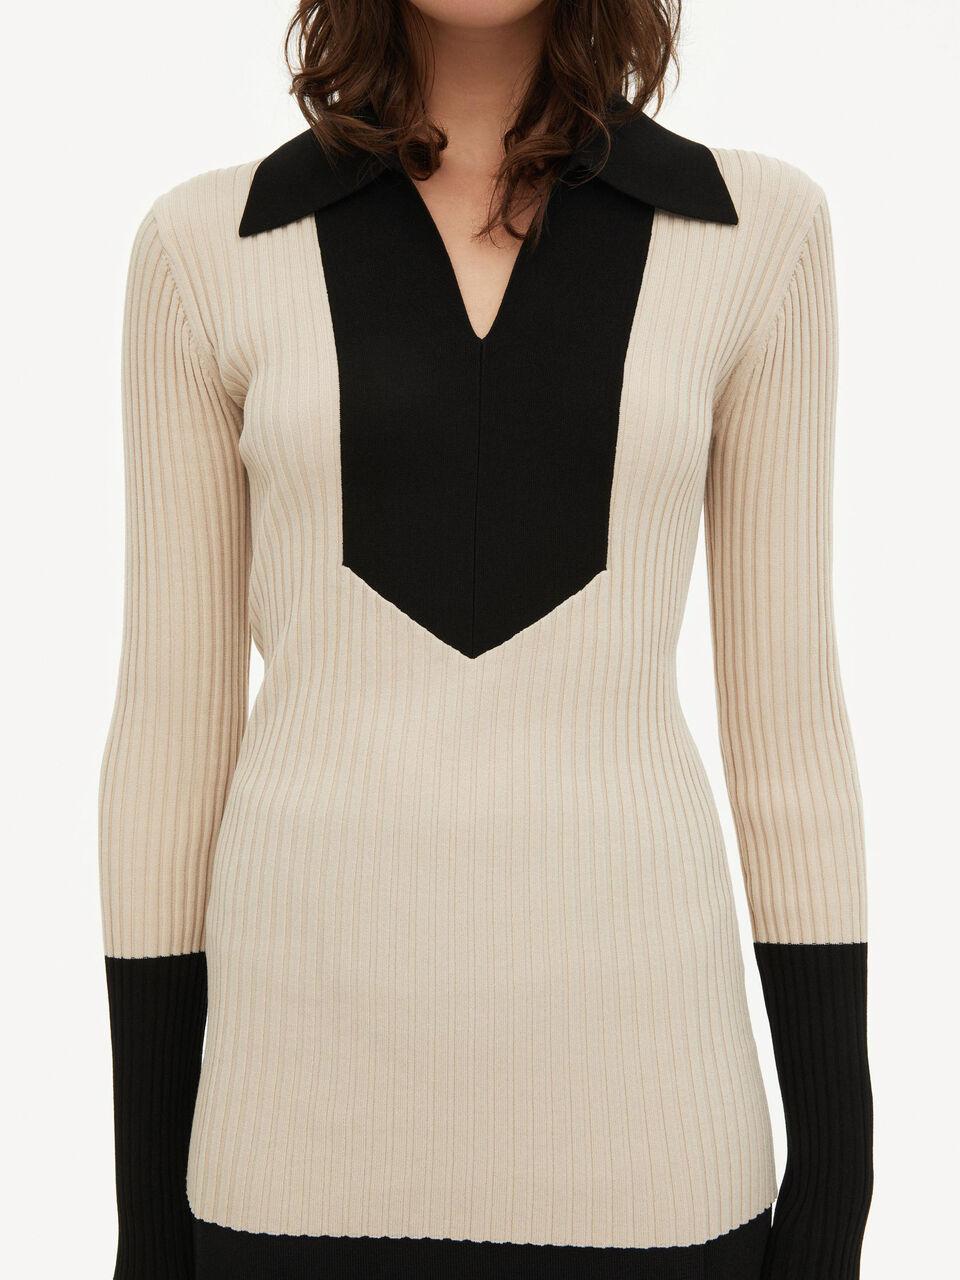 ANETA SWEATER-Sweater-By Malene Birger-Debs Boutique